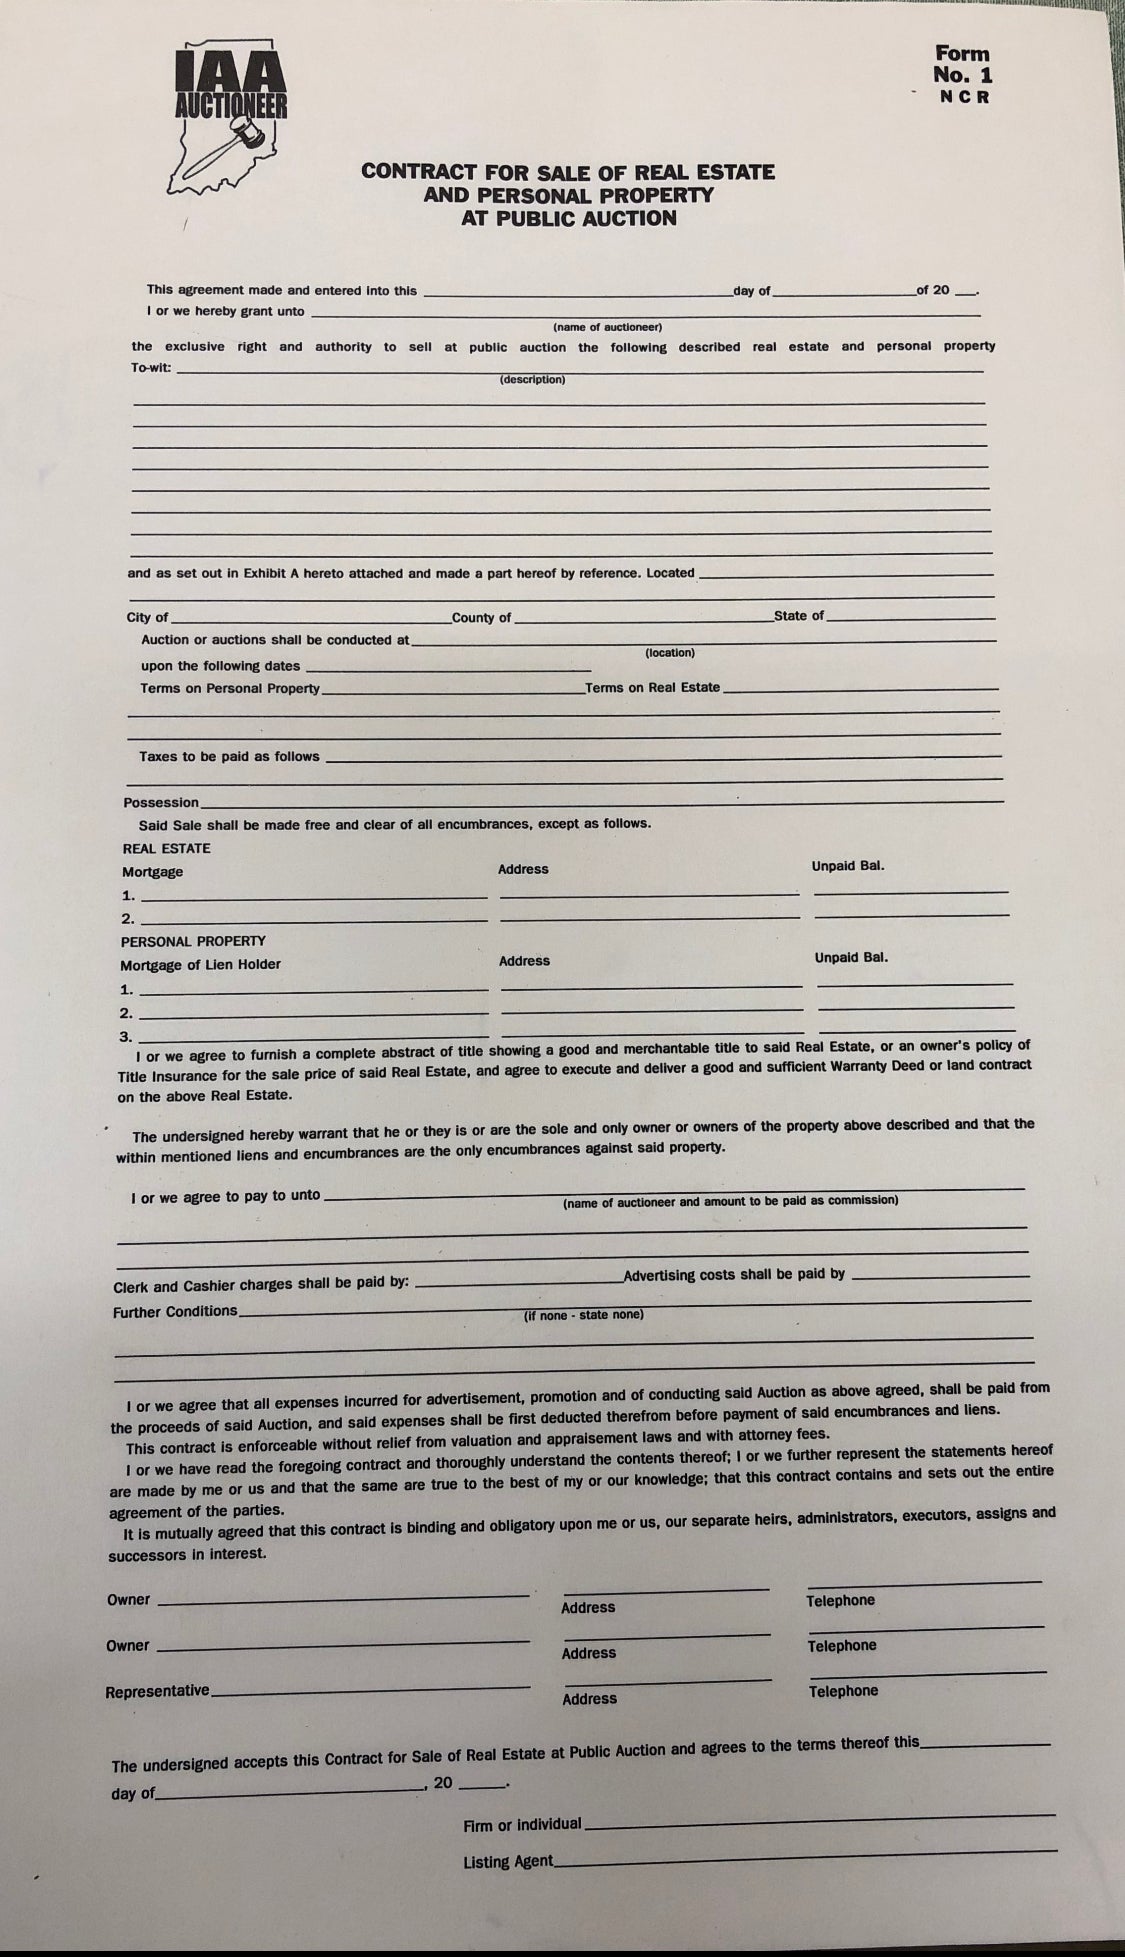 Indiana 2-part PP & RE Contract (50 sets) Form #1